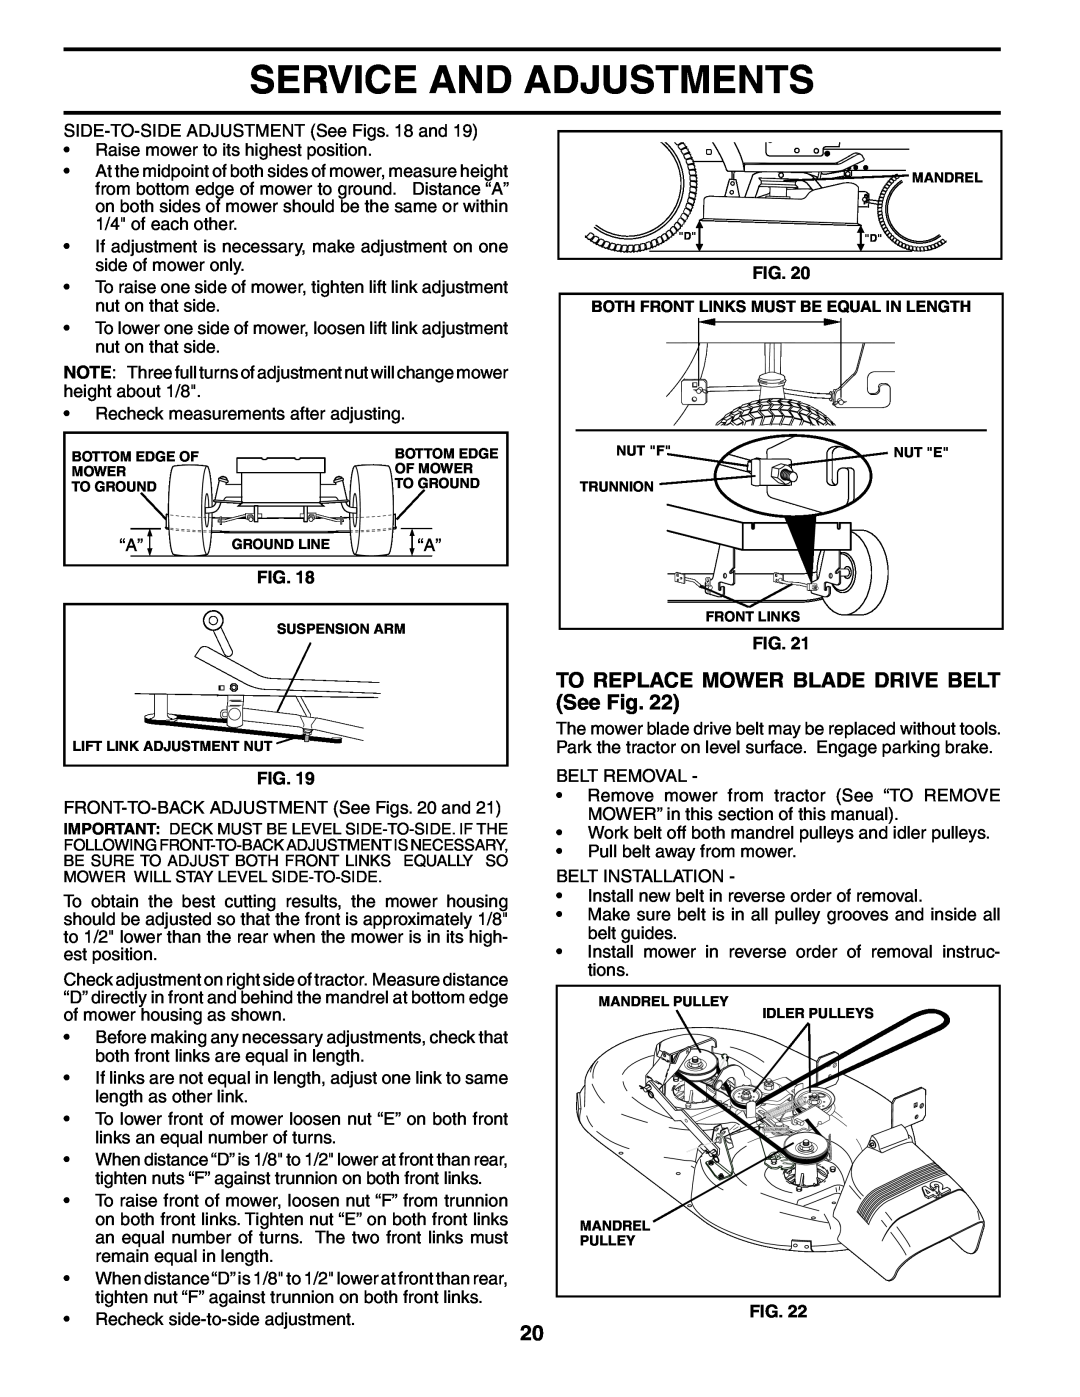 Poulan 194831 manual TO REPLACE MOWER BLADE DRIVE BELT See Fig, Service And Adjustments 